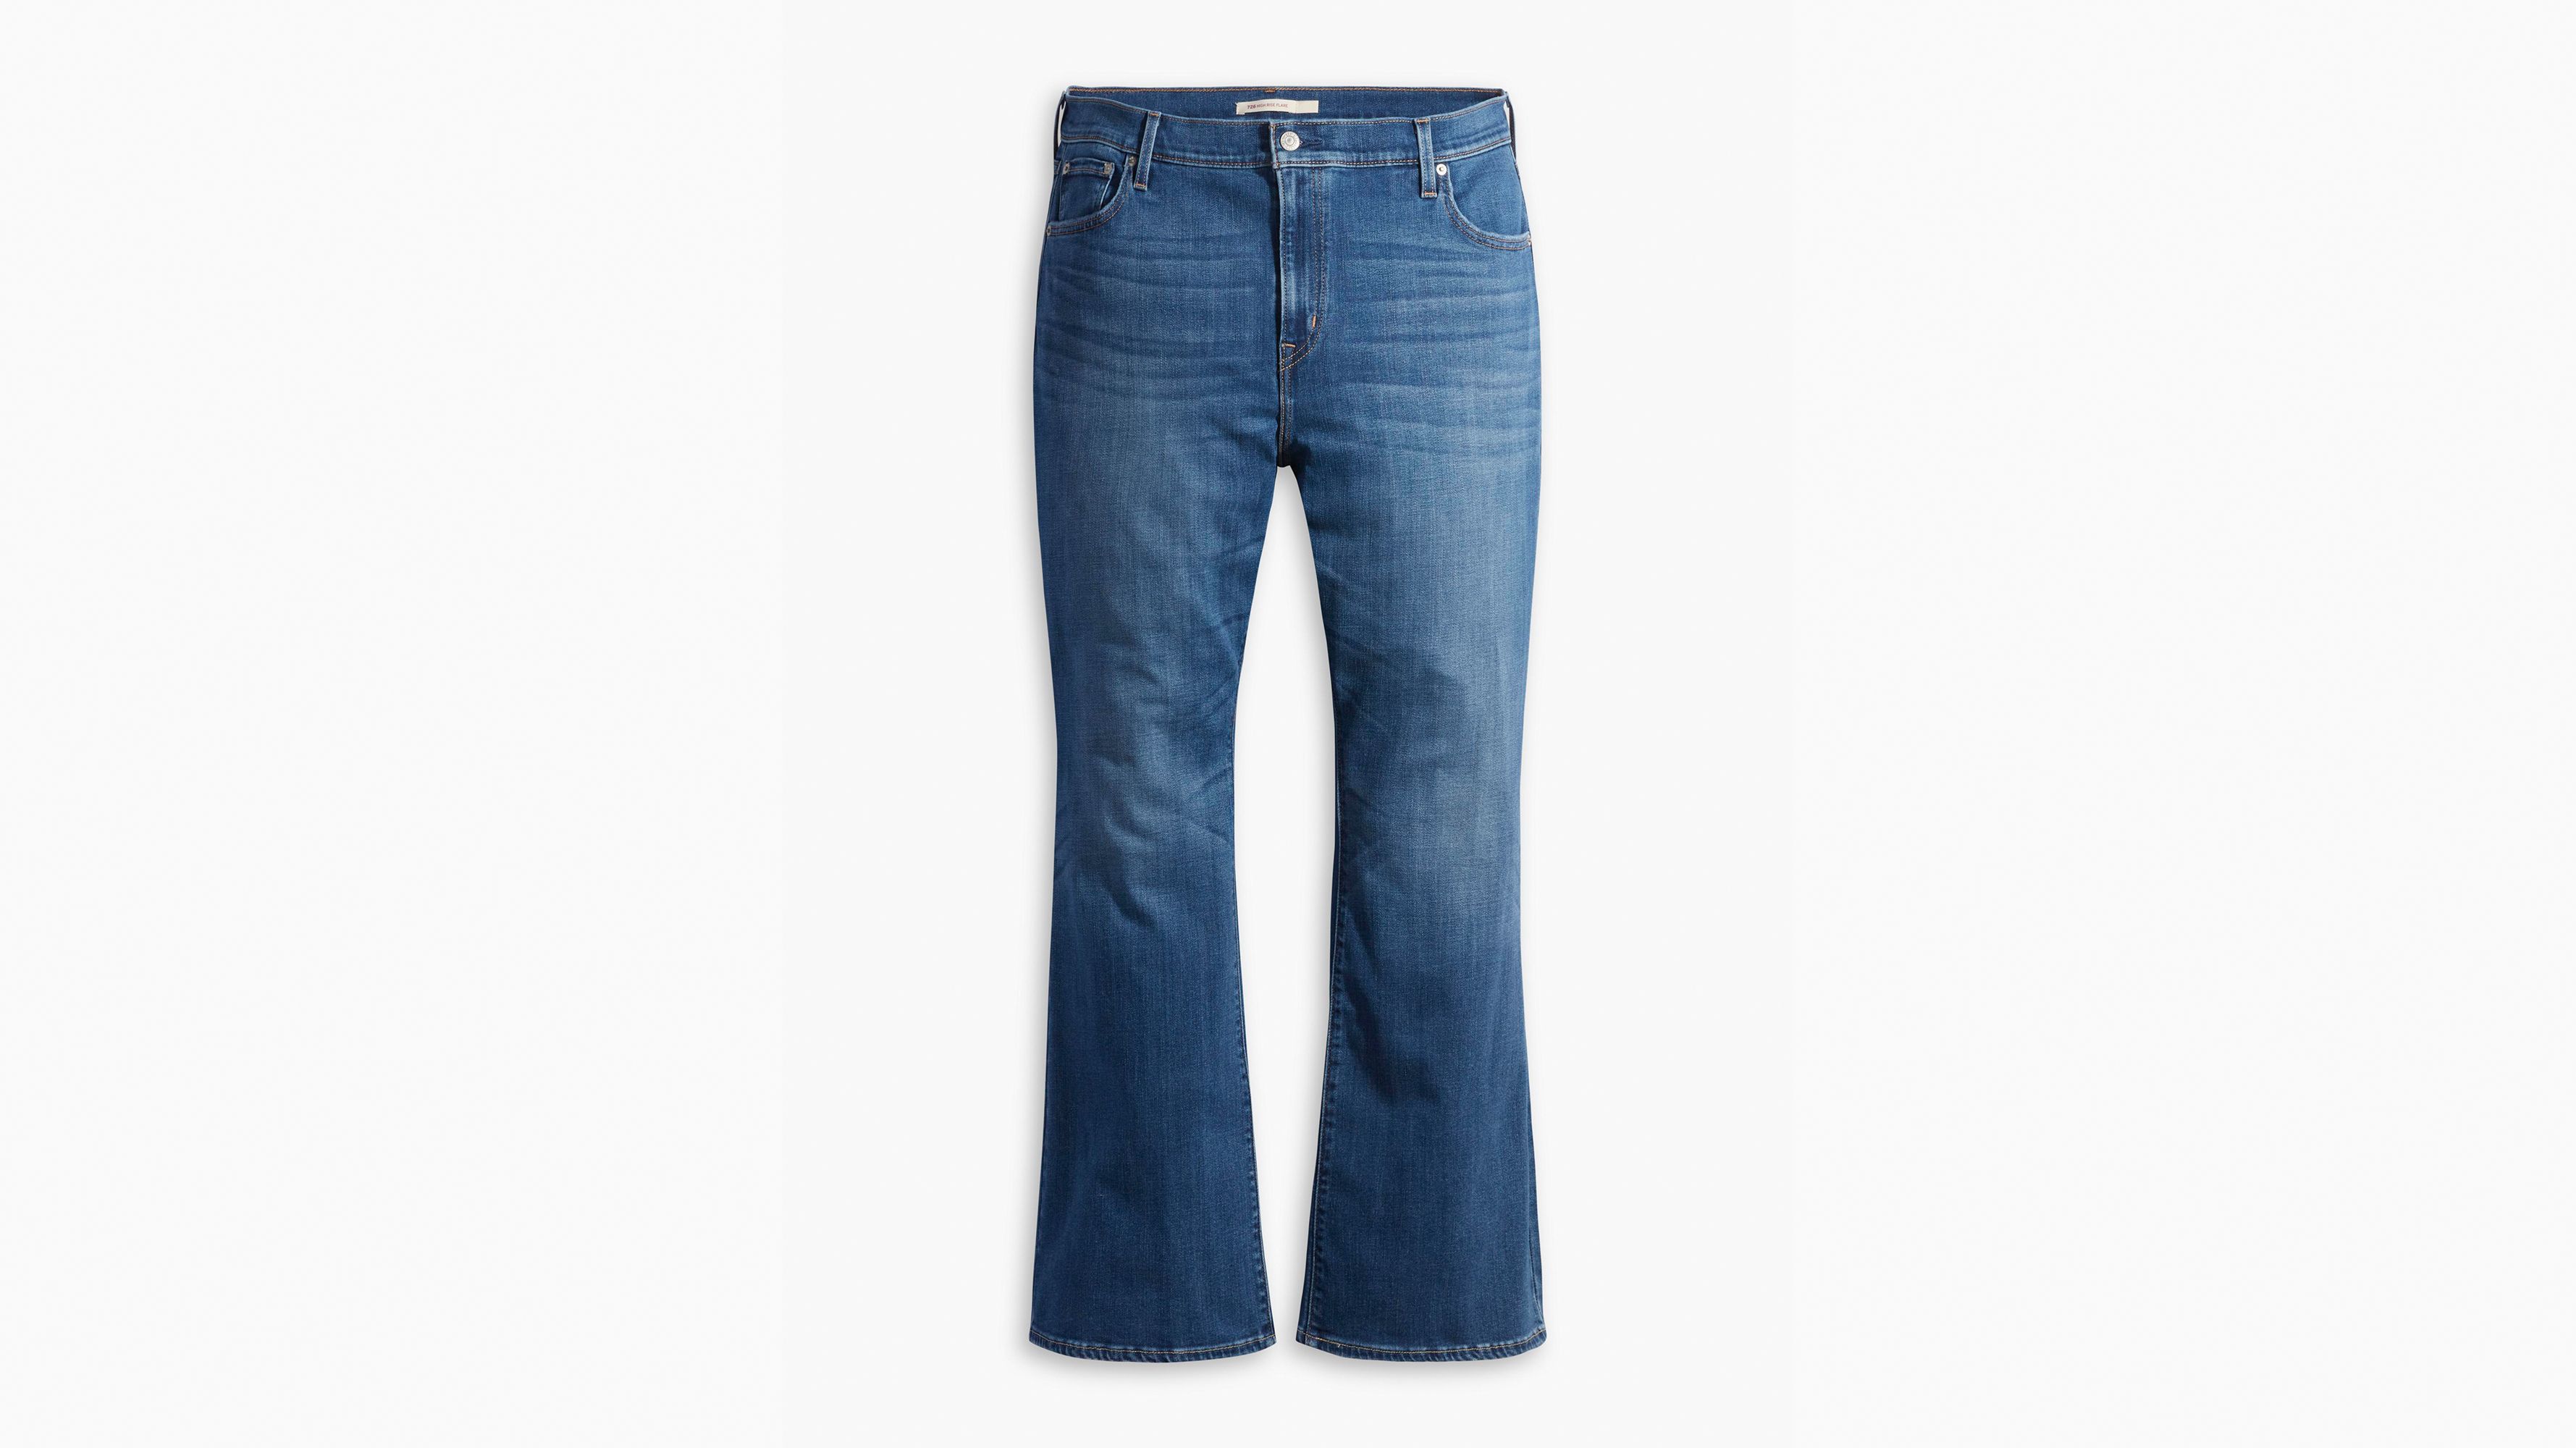 Levi's Women's 726 High Rise Flare Jeans, (New) Tribeca Moon, 34